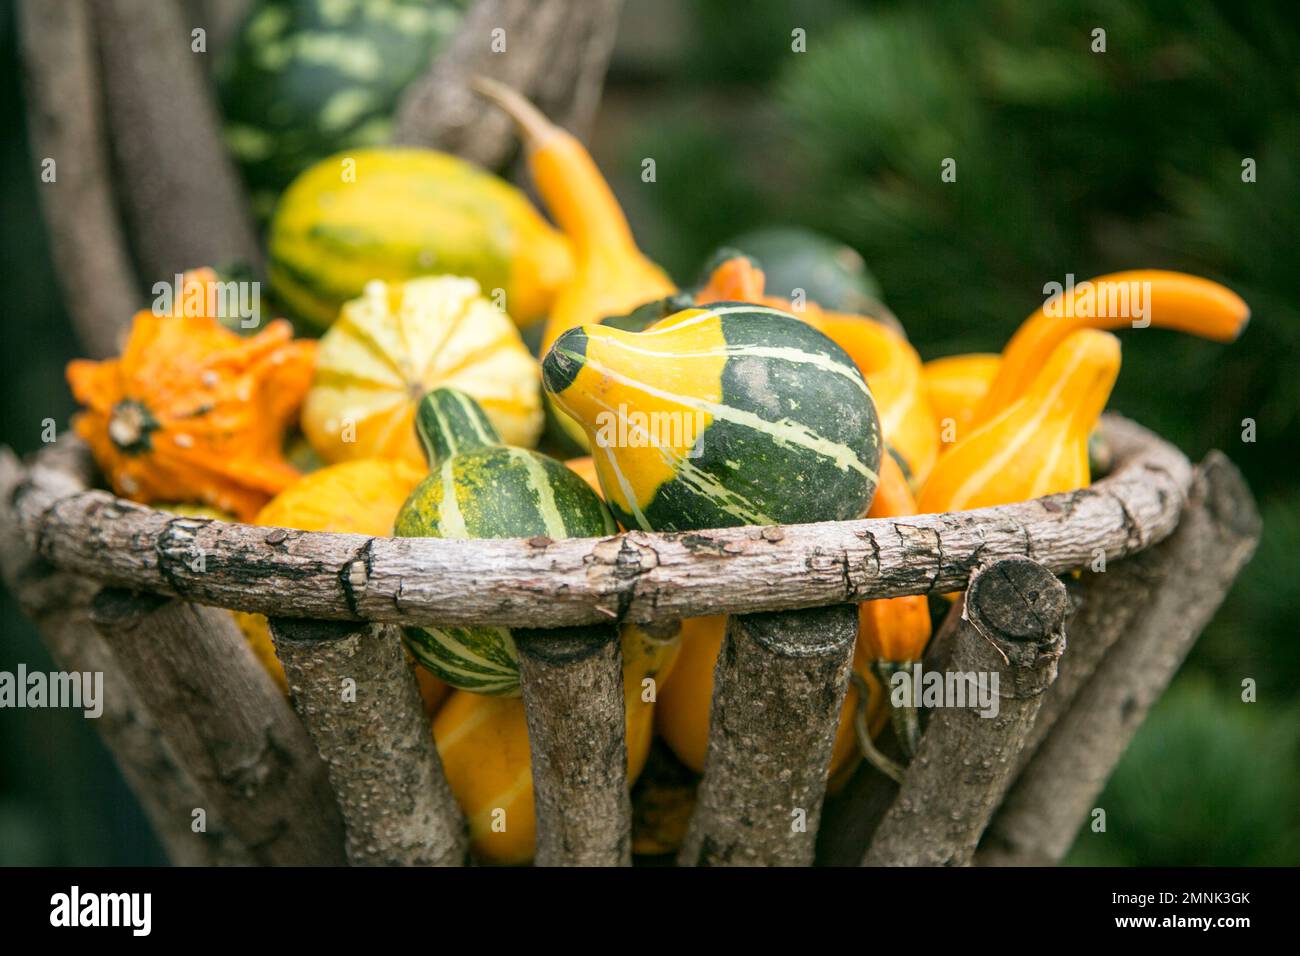 Autumn pumpkins and gourds in basket Stock Photo